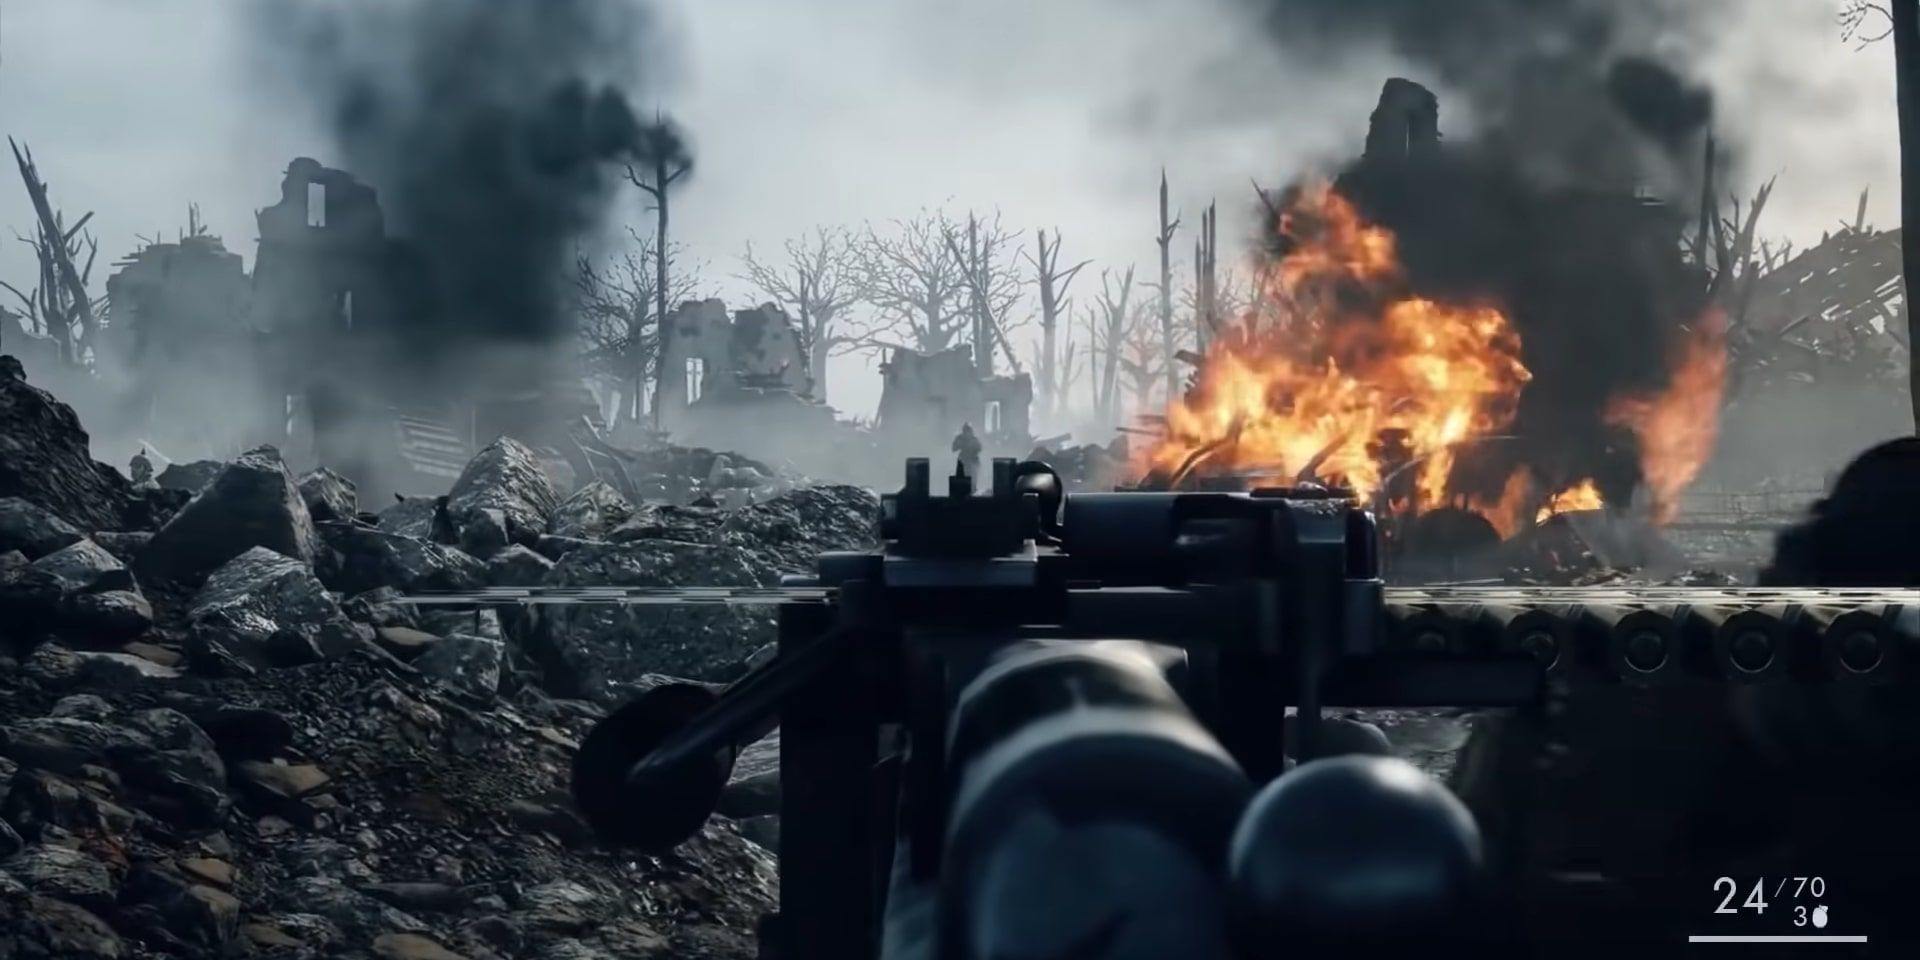 The opening sequence in Battlefield 1 where a soldier is aiming his sights at an enemy near burning wreckage.